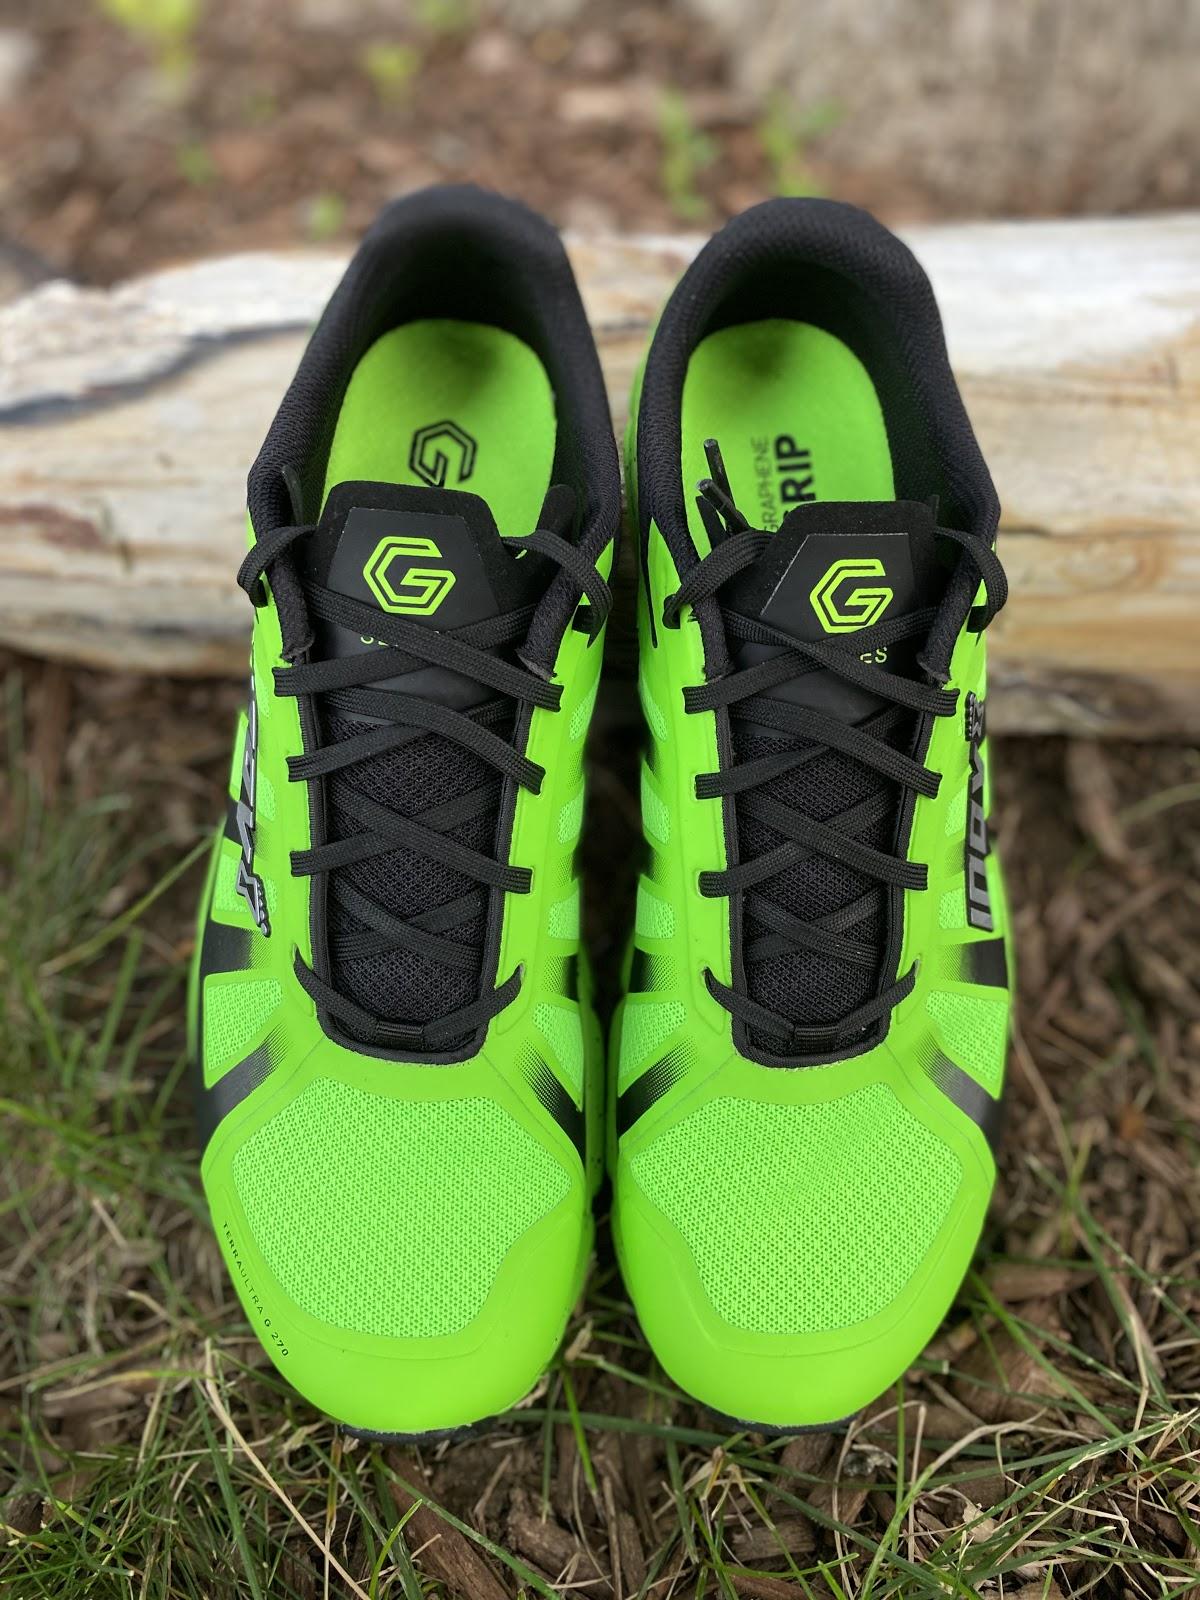 Road Trail Run: inov-8 Terra Ultra G 270 MultiTester Review: Lots to  SaySensational, Light, and Lively, Graphene Gripping Trail Marvel